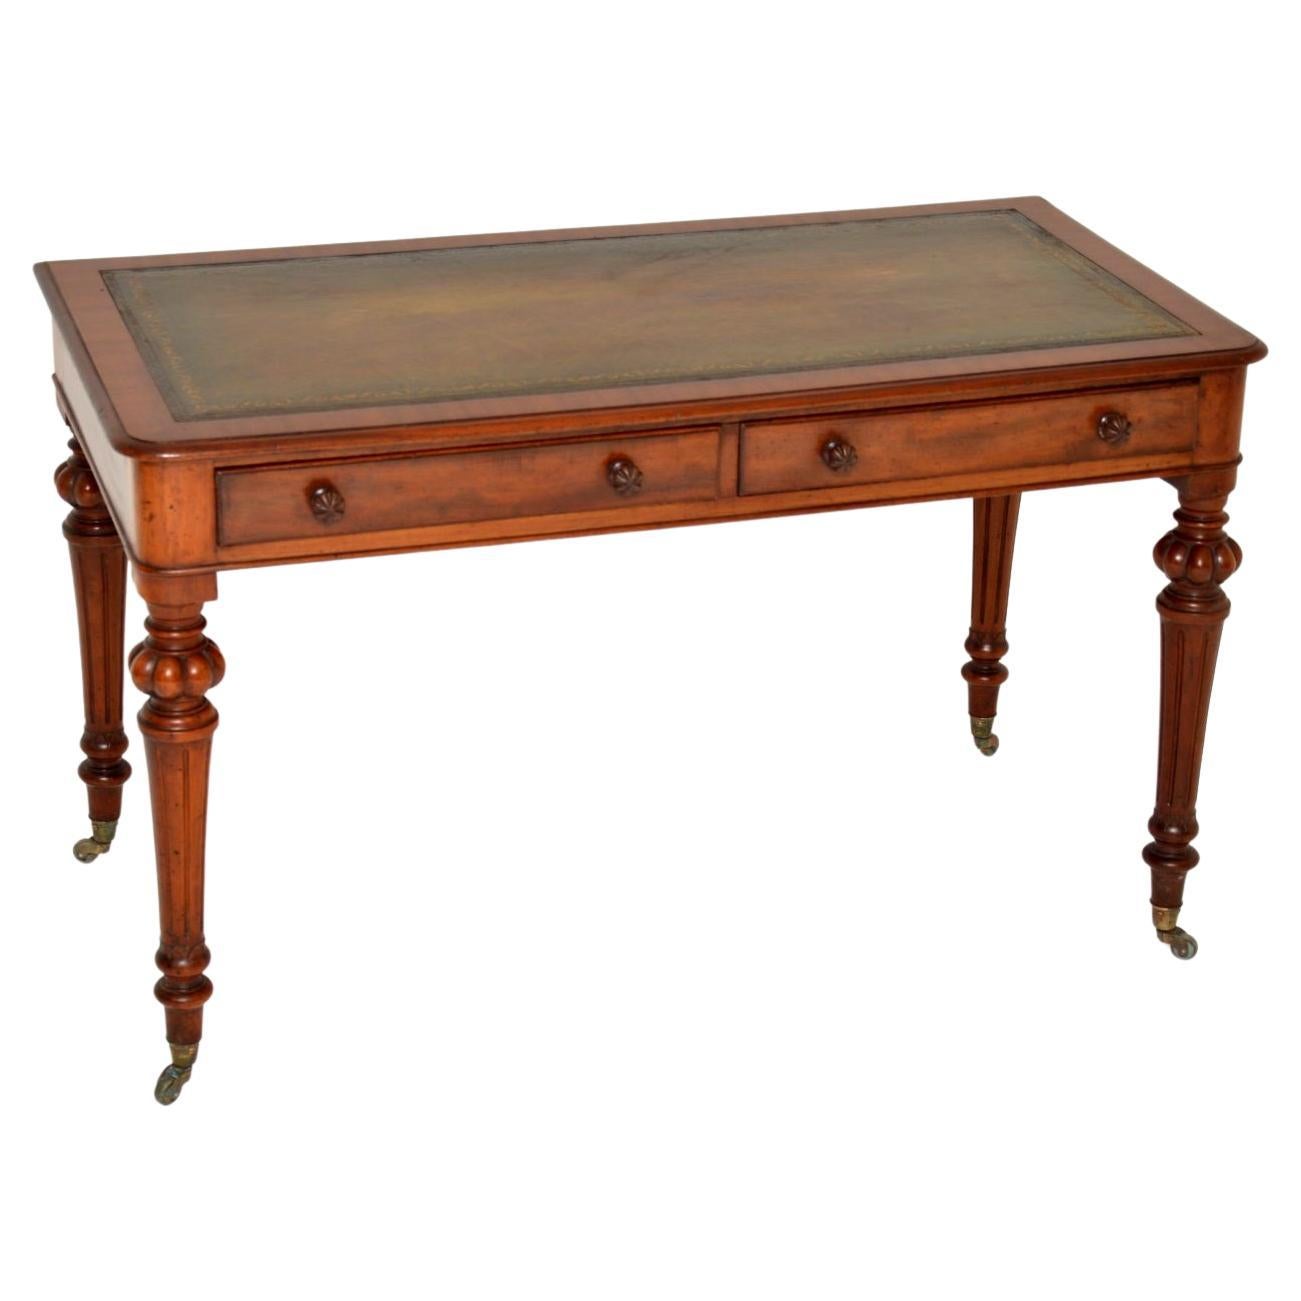 William IV Writing Desk or Table of Mahogany with Leather Top from ...